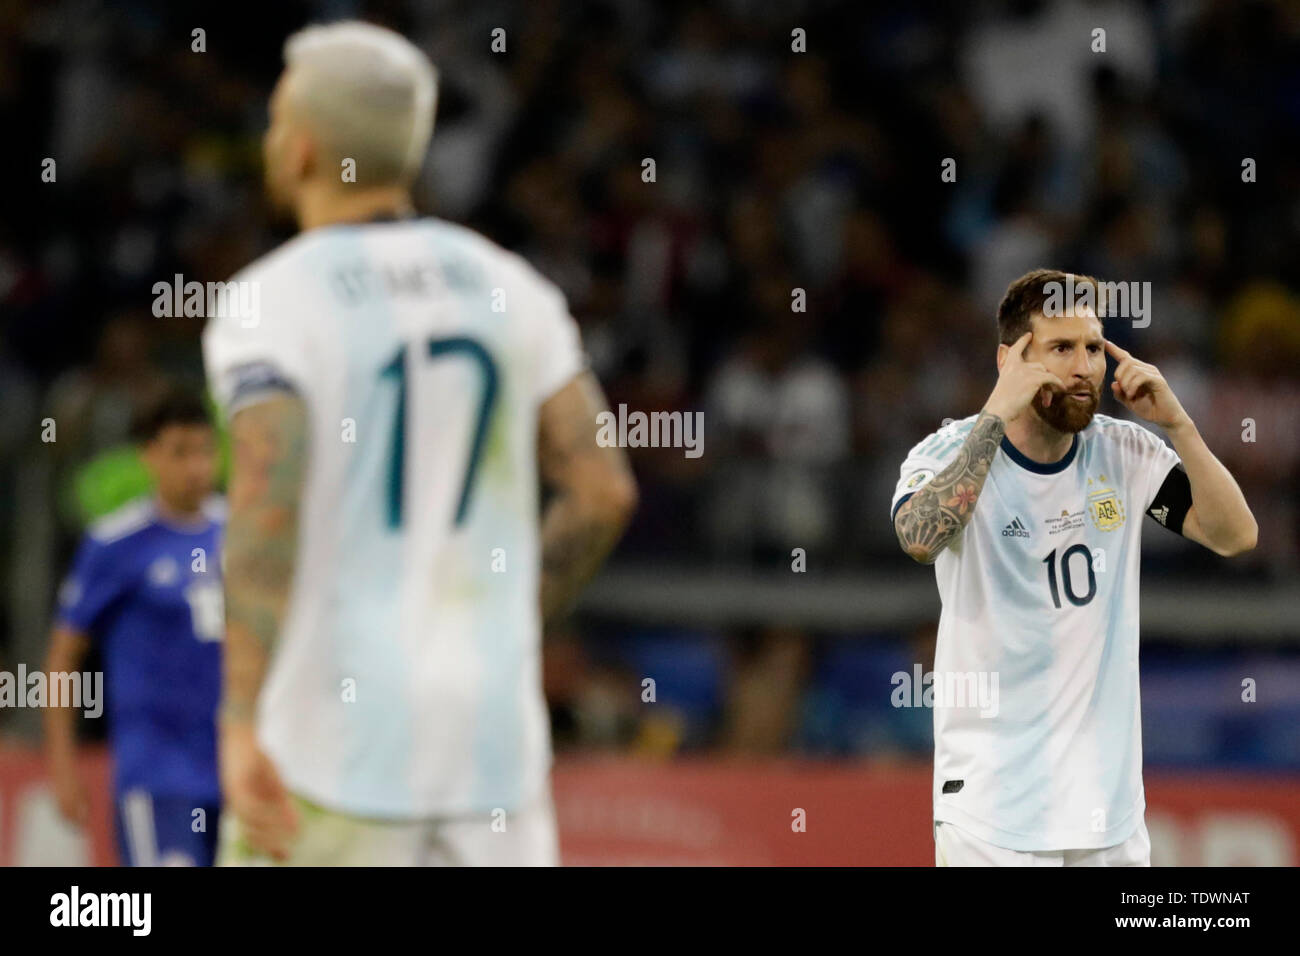 Belo Horizonte, Brazil. 19th June, 2019. Lionel Messi (R) of Argentina reacts during the Copa America 2019 soccer match between Argentina and Paraguay at Mineirao Stadium in Belo Horizonte, Brazil, June 19, 2019. Credit: Lucio Tavora/Xinhua/Alamy Live News Stock Photo